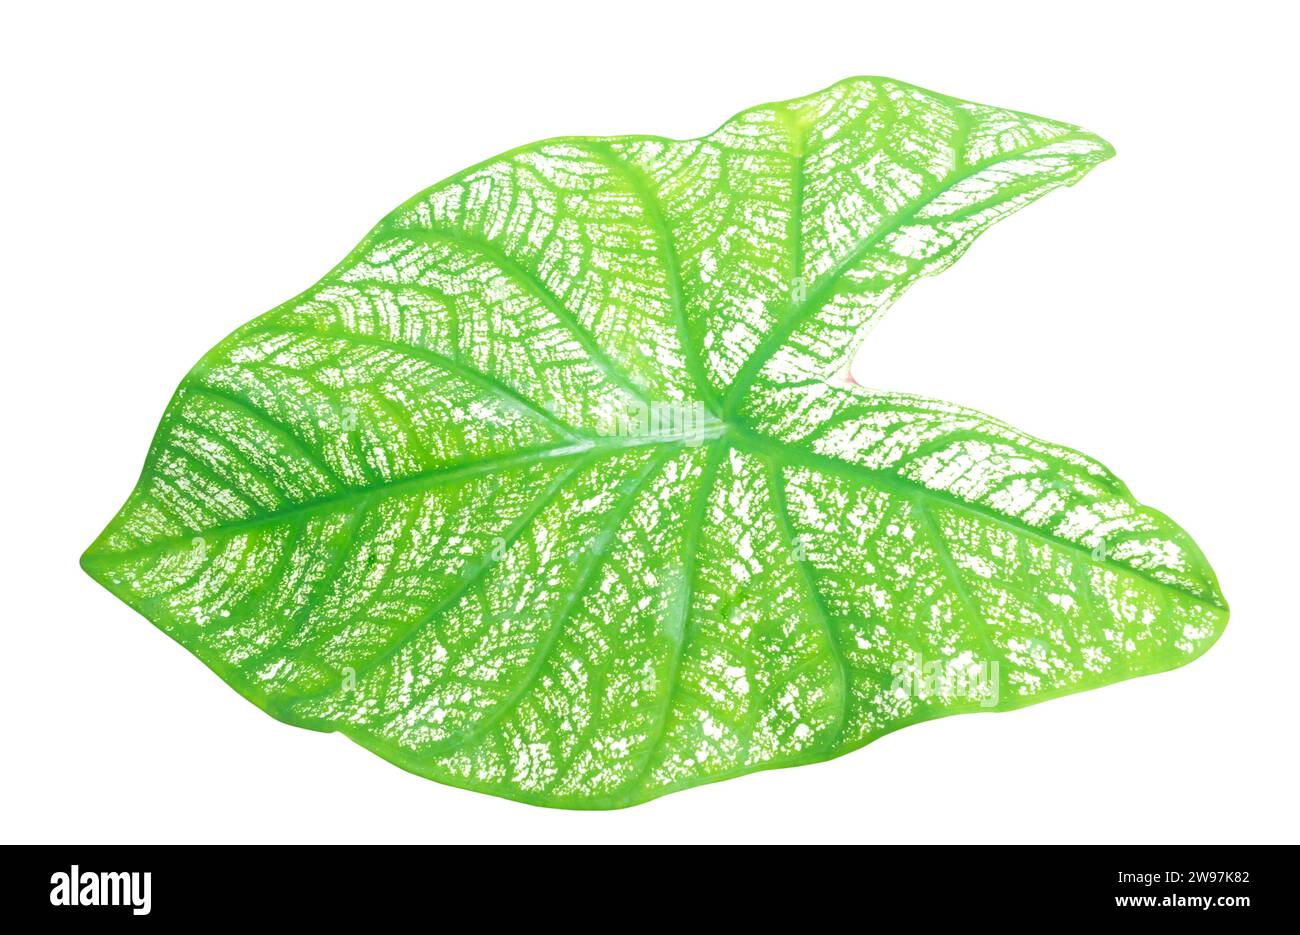 Close up and top view of fresh green caladium leaf with pattern is isolated on white background with clipping path. Stock Photo